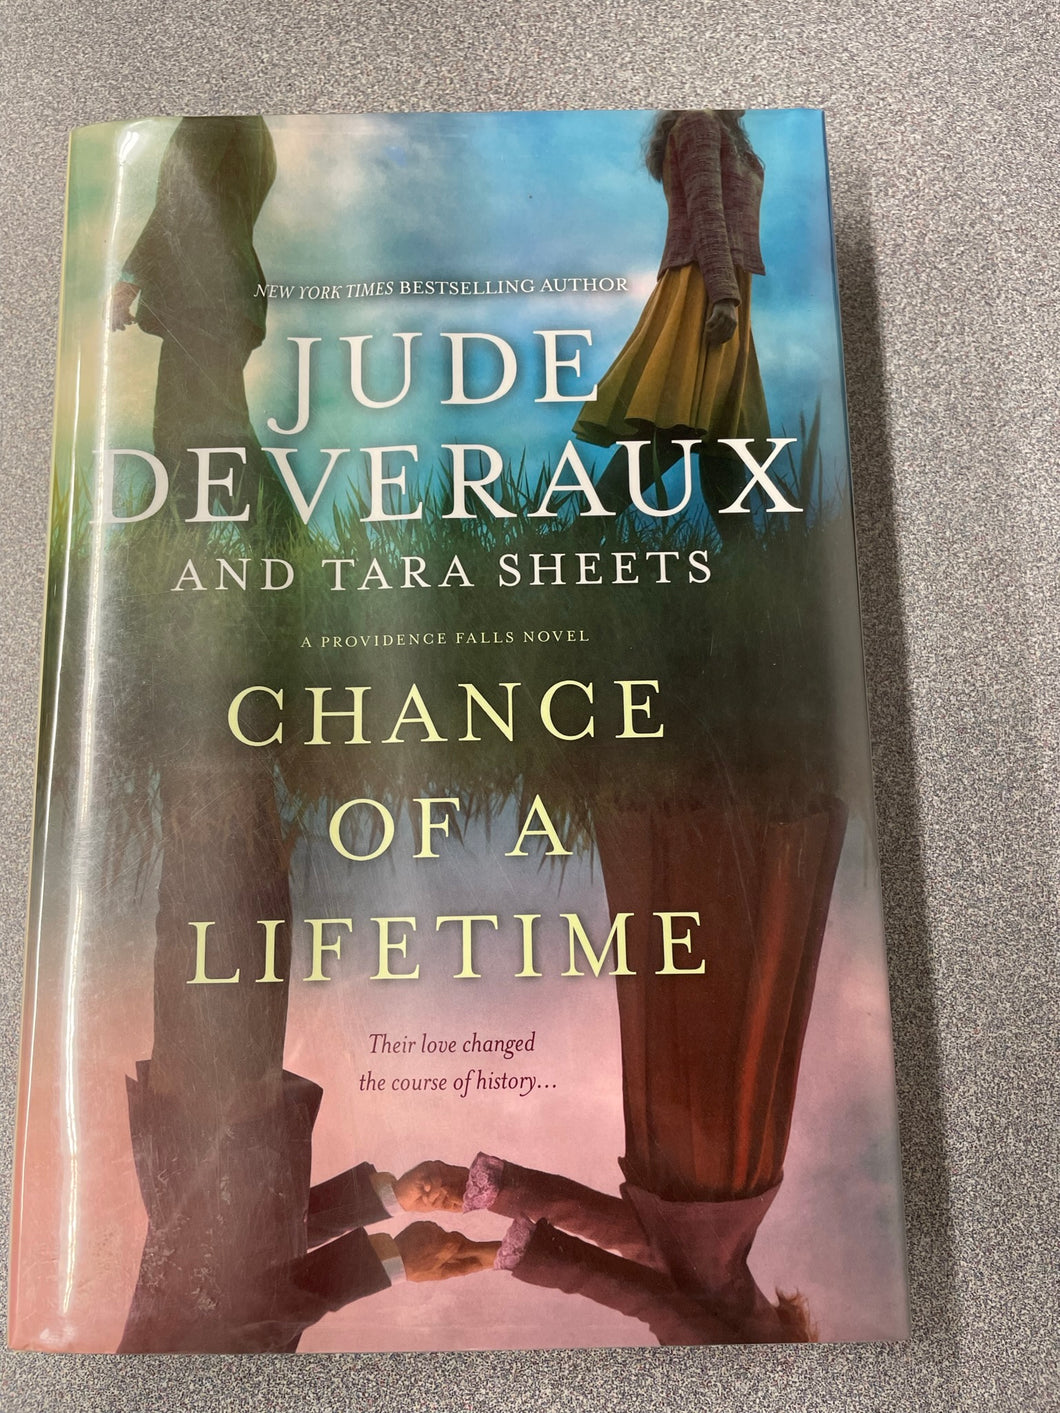 Deveraux, Jude and Tara Sheets, Chance of a Lifetime [2020] R 9/23